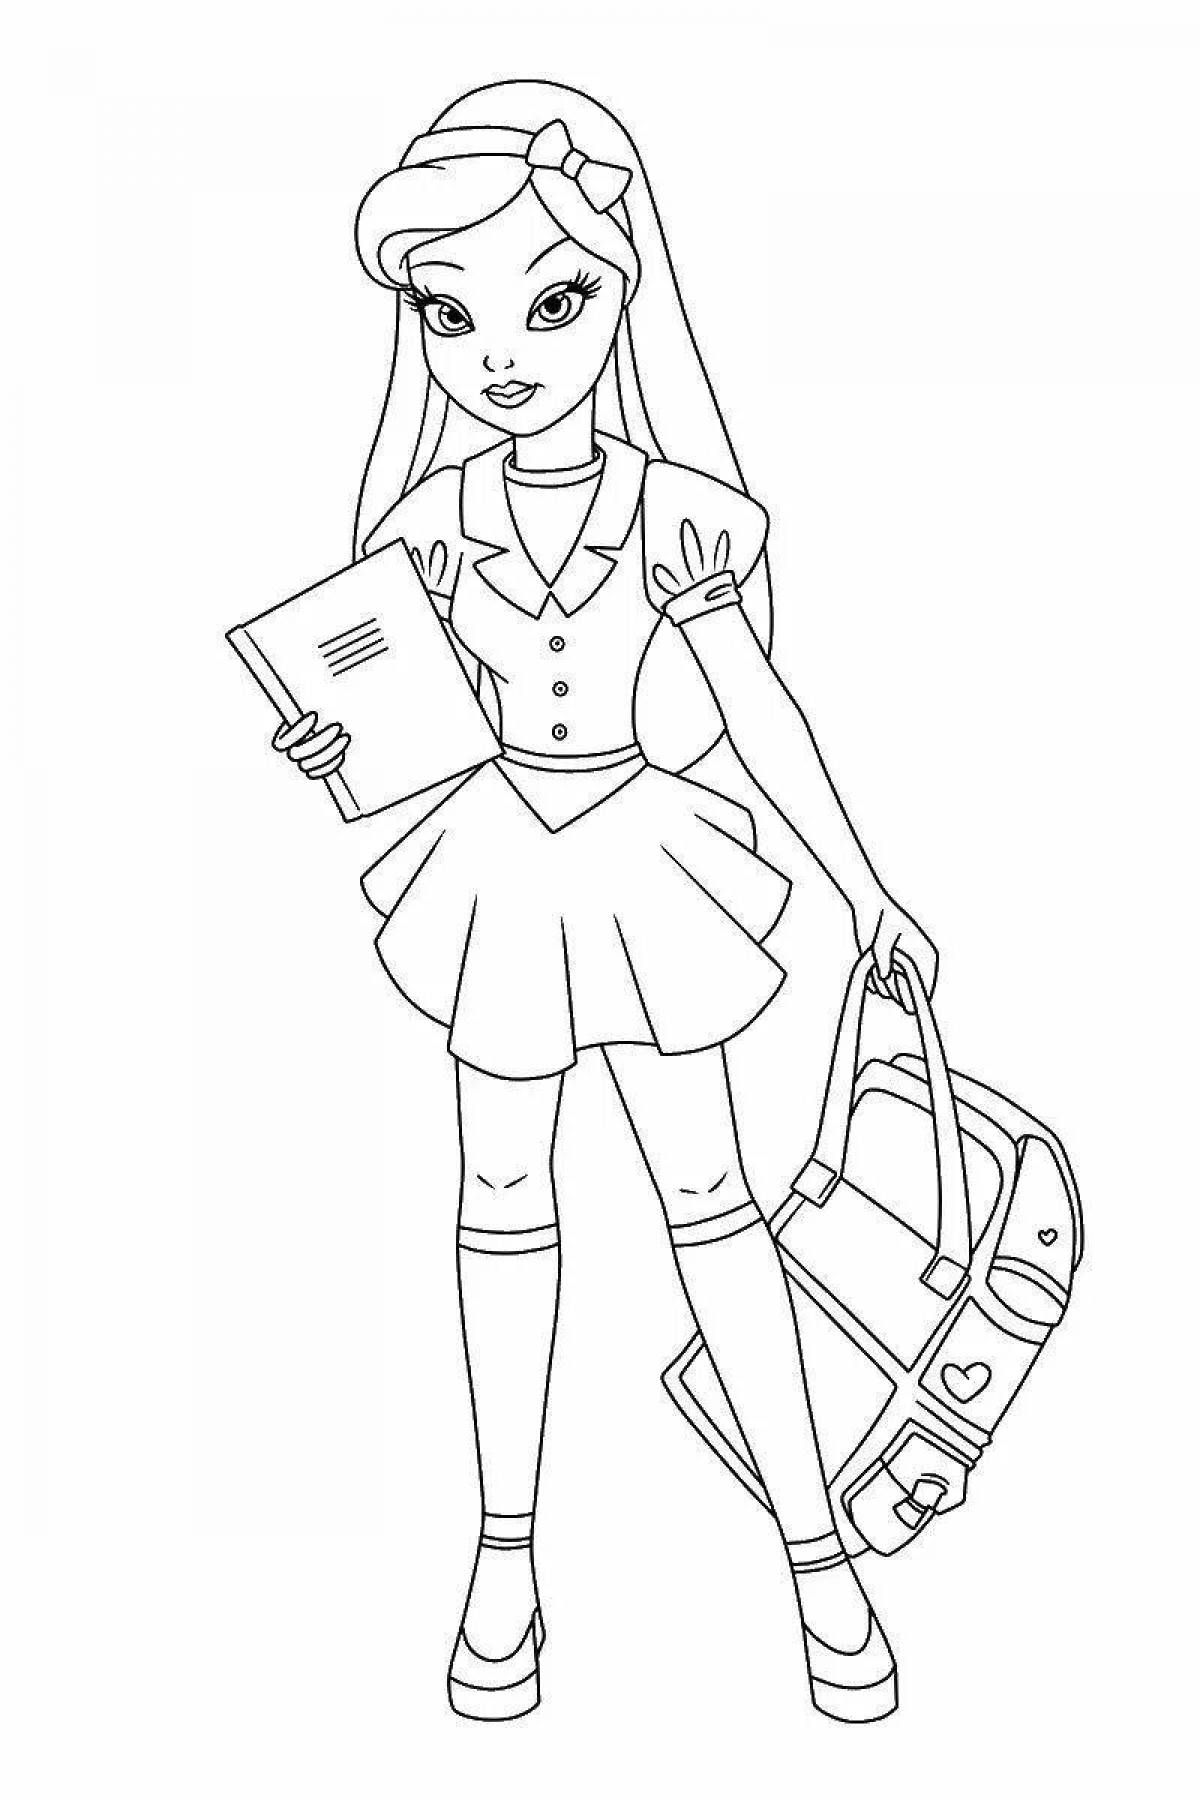 Coloring page determined schoolgirl